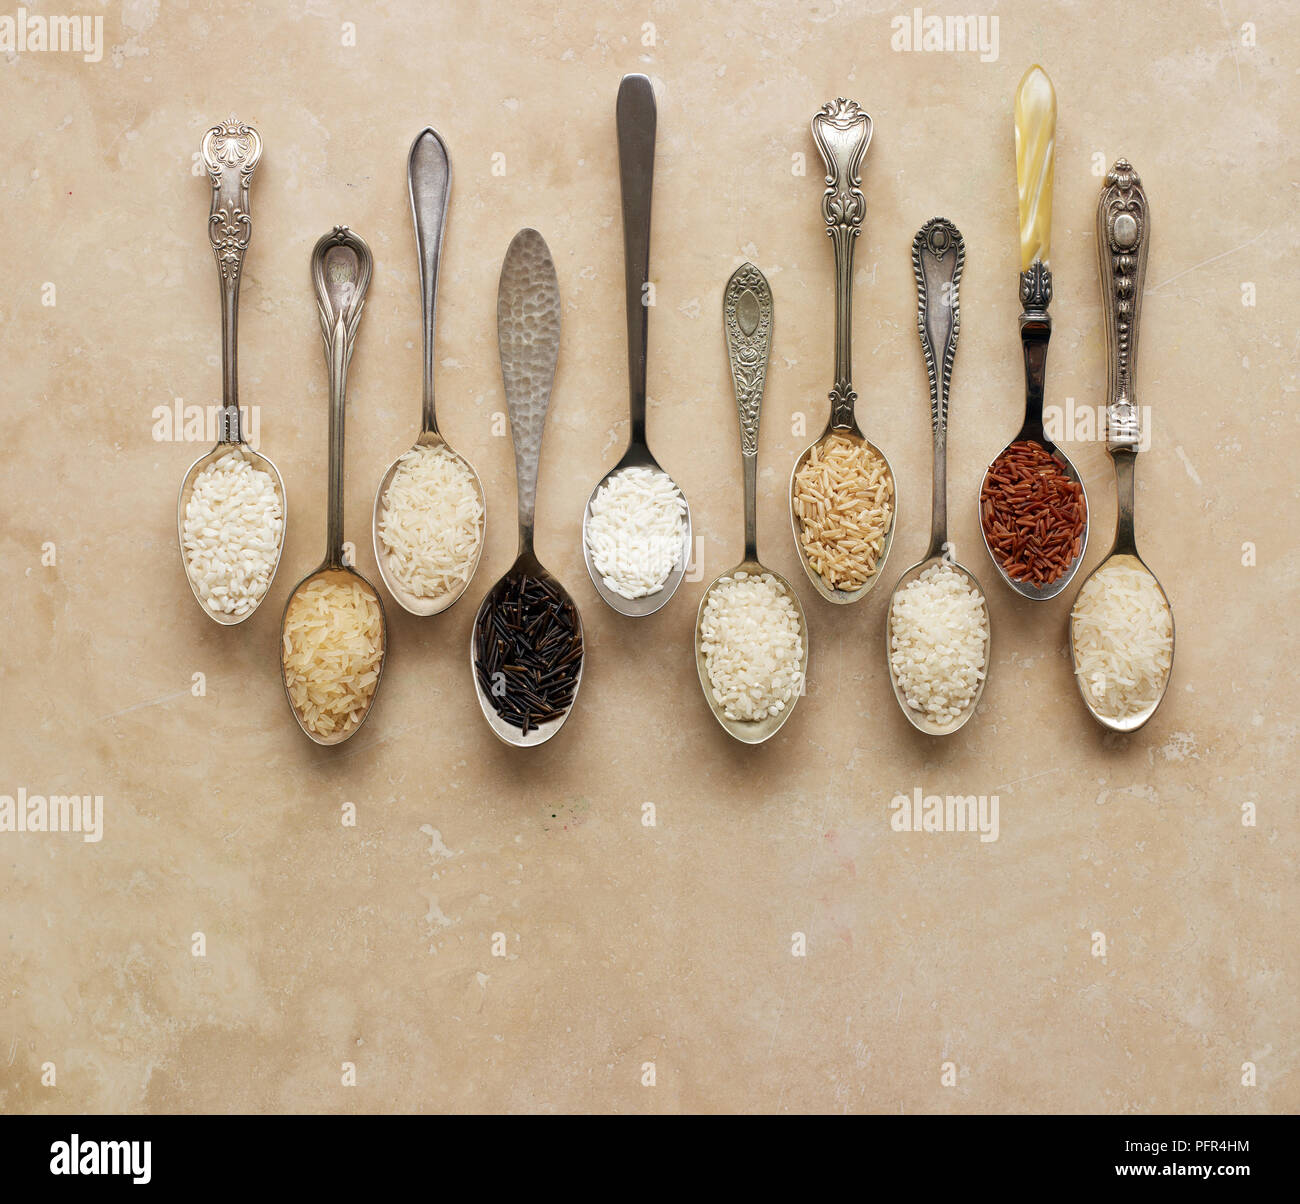 Spoons containing different types of rice, risotto rice, long-grain rice, basmati rice, wild rice, sticky rice, pudding rice, brown rice, sushi rice, red rice (camargue rice), jasmine rice Stock Photo